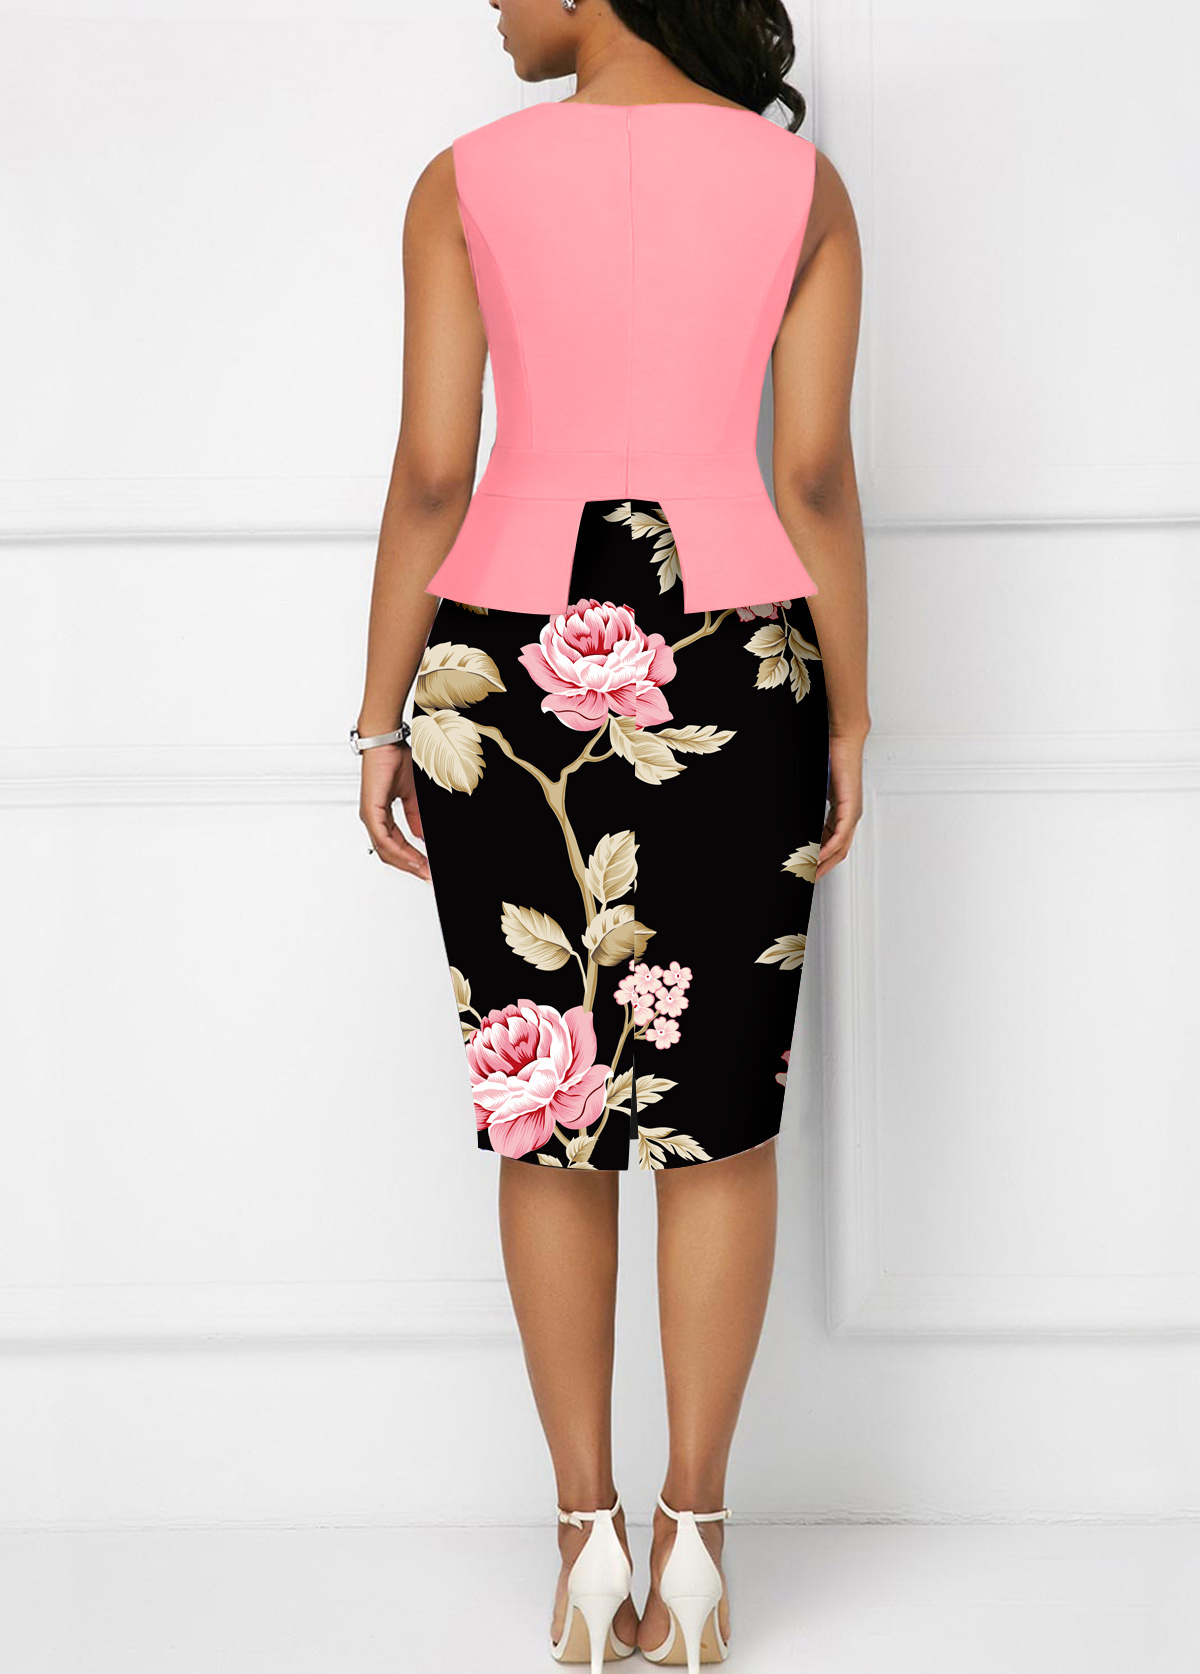 Floral Print Cut Out Pink Bodycon Dress